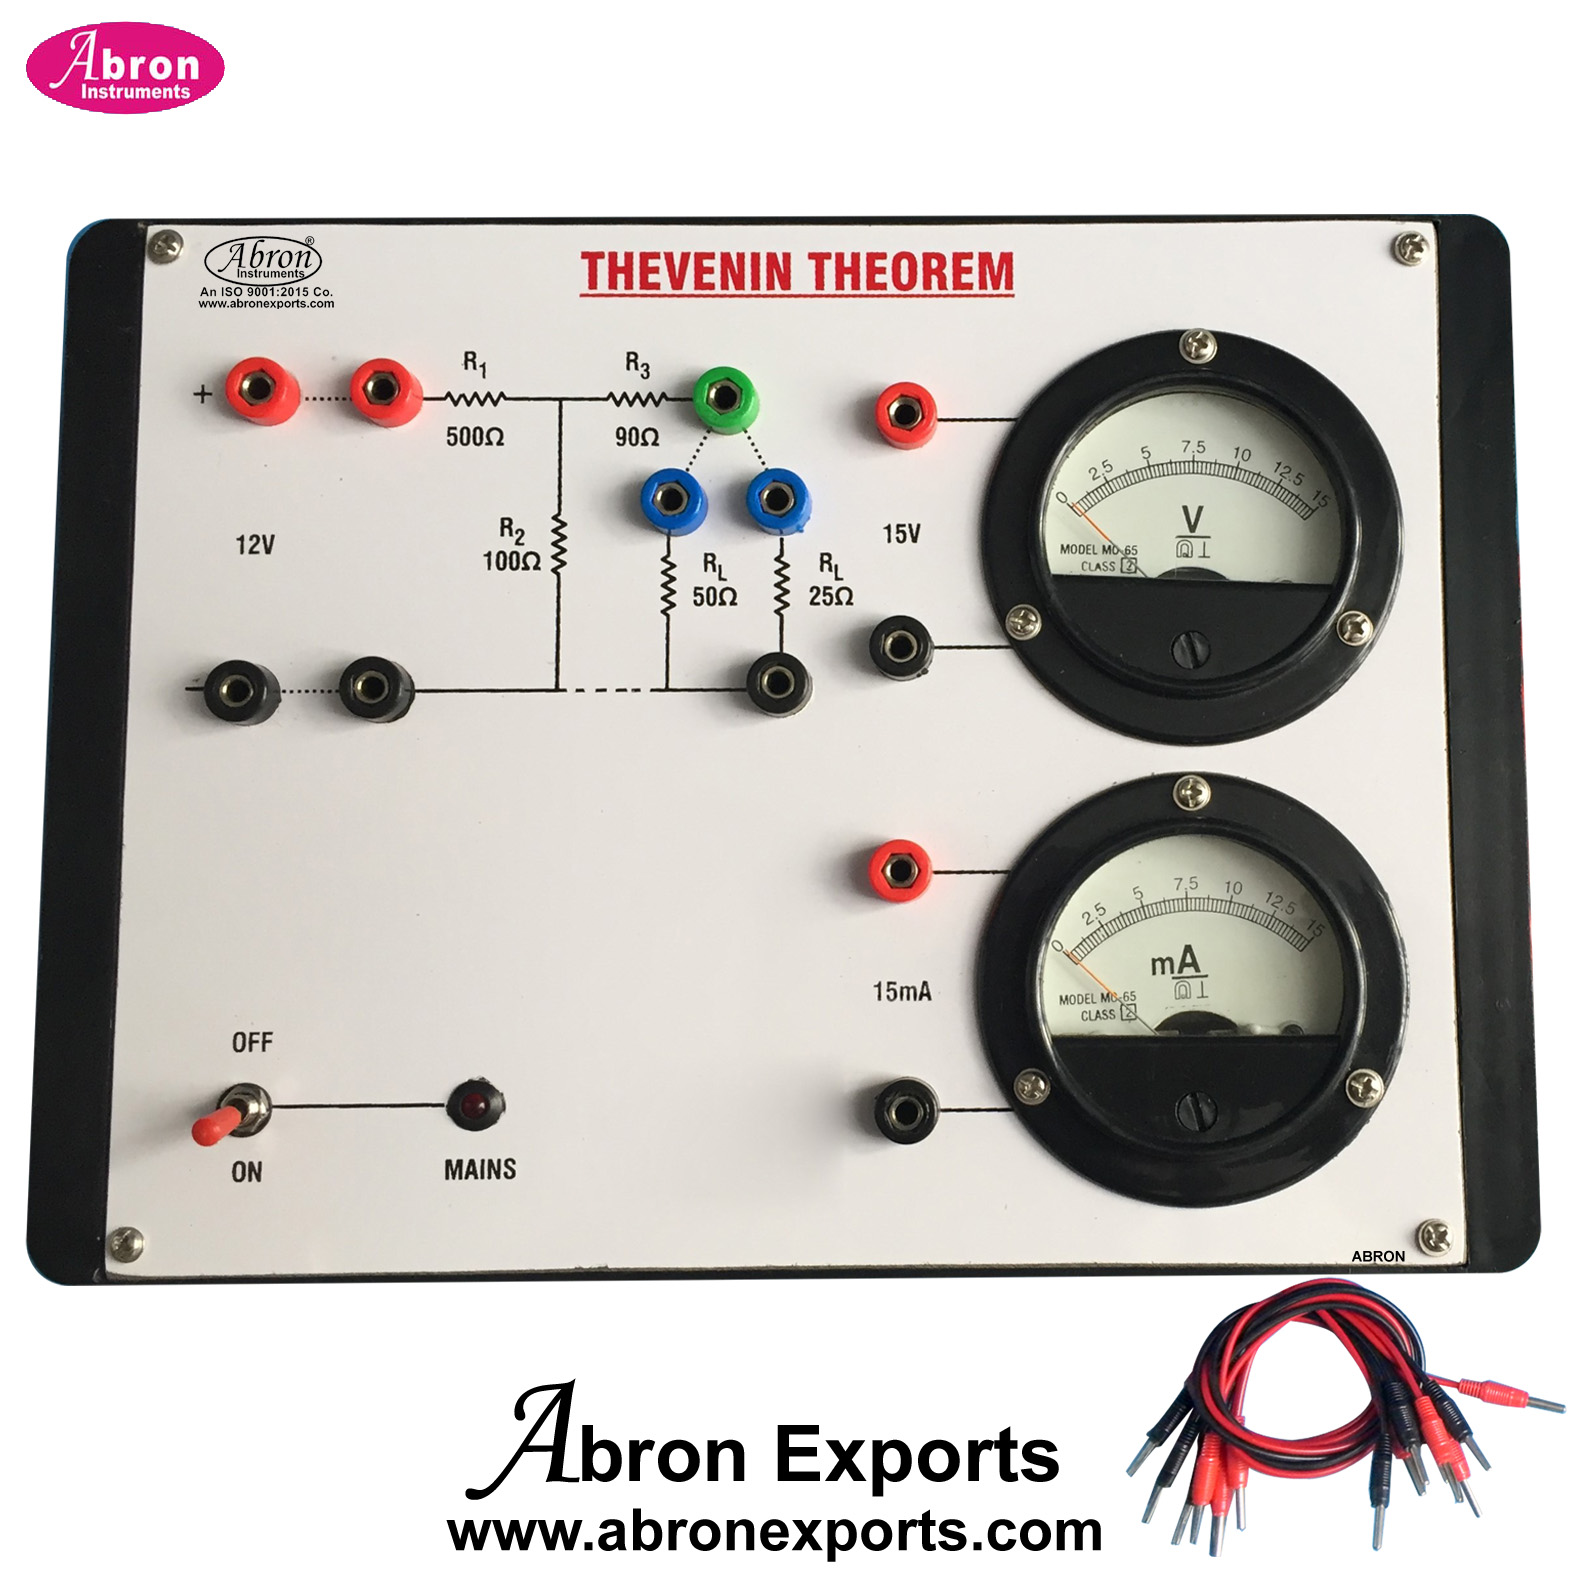 Study Theorem Thevenin Theorem With Power Supply 2 Meters Electronic Trainer Kit Abron AE-1430THA